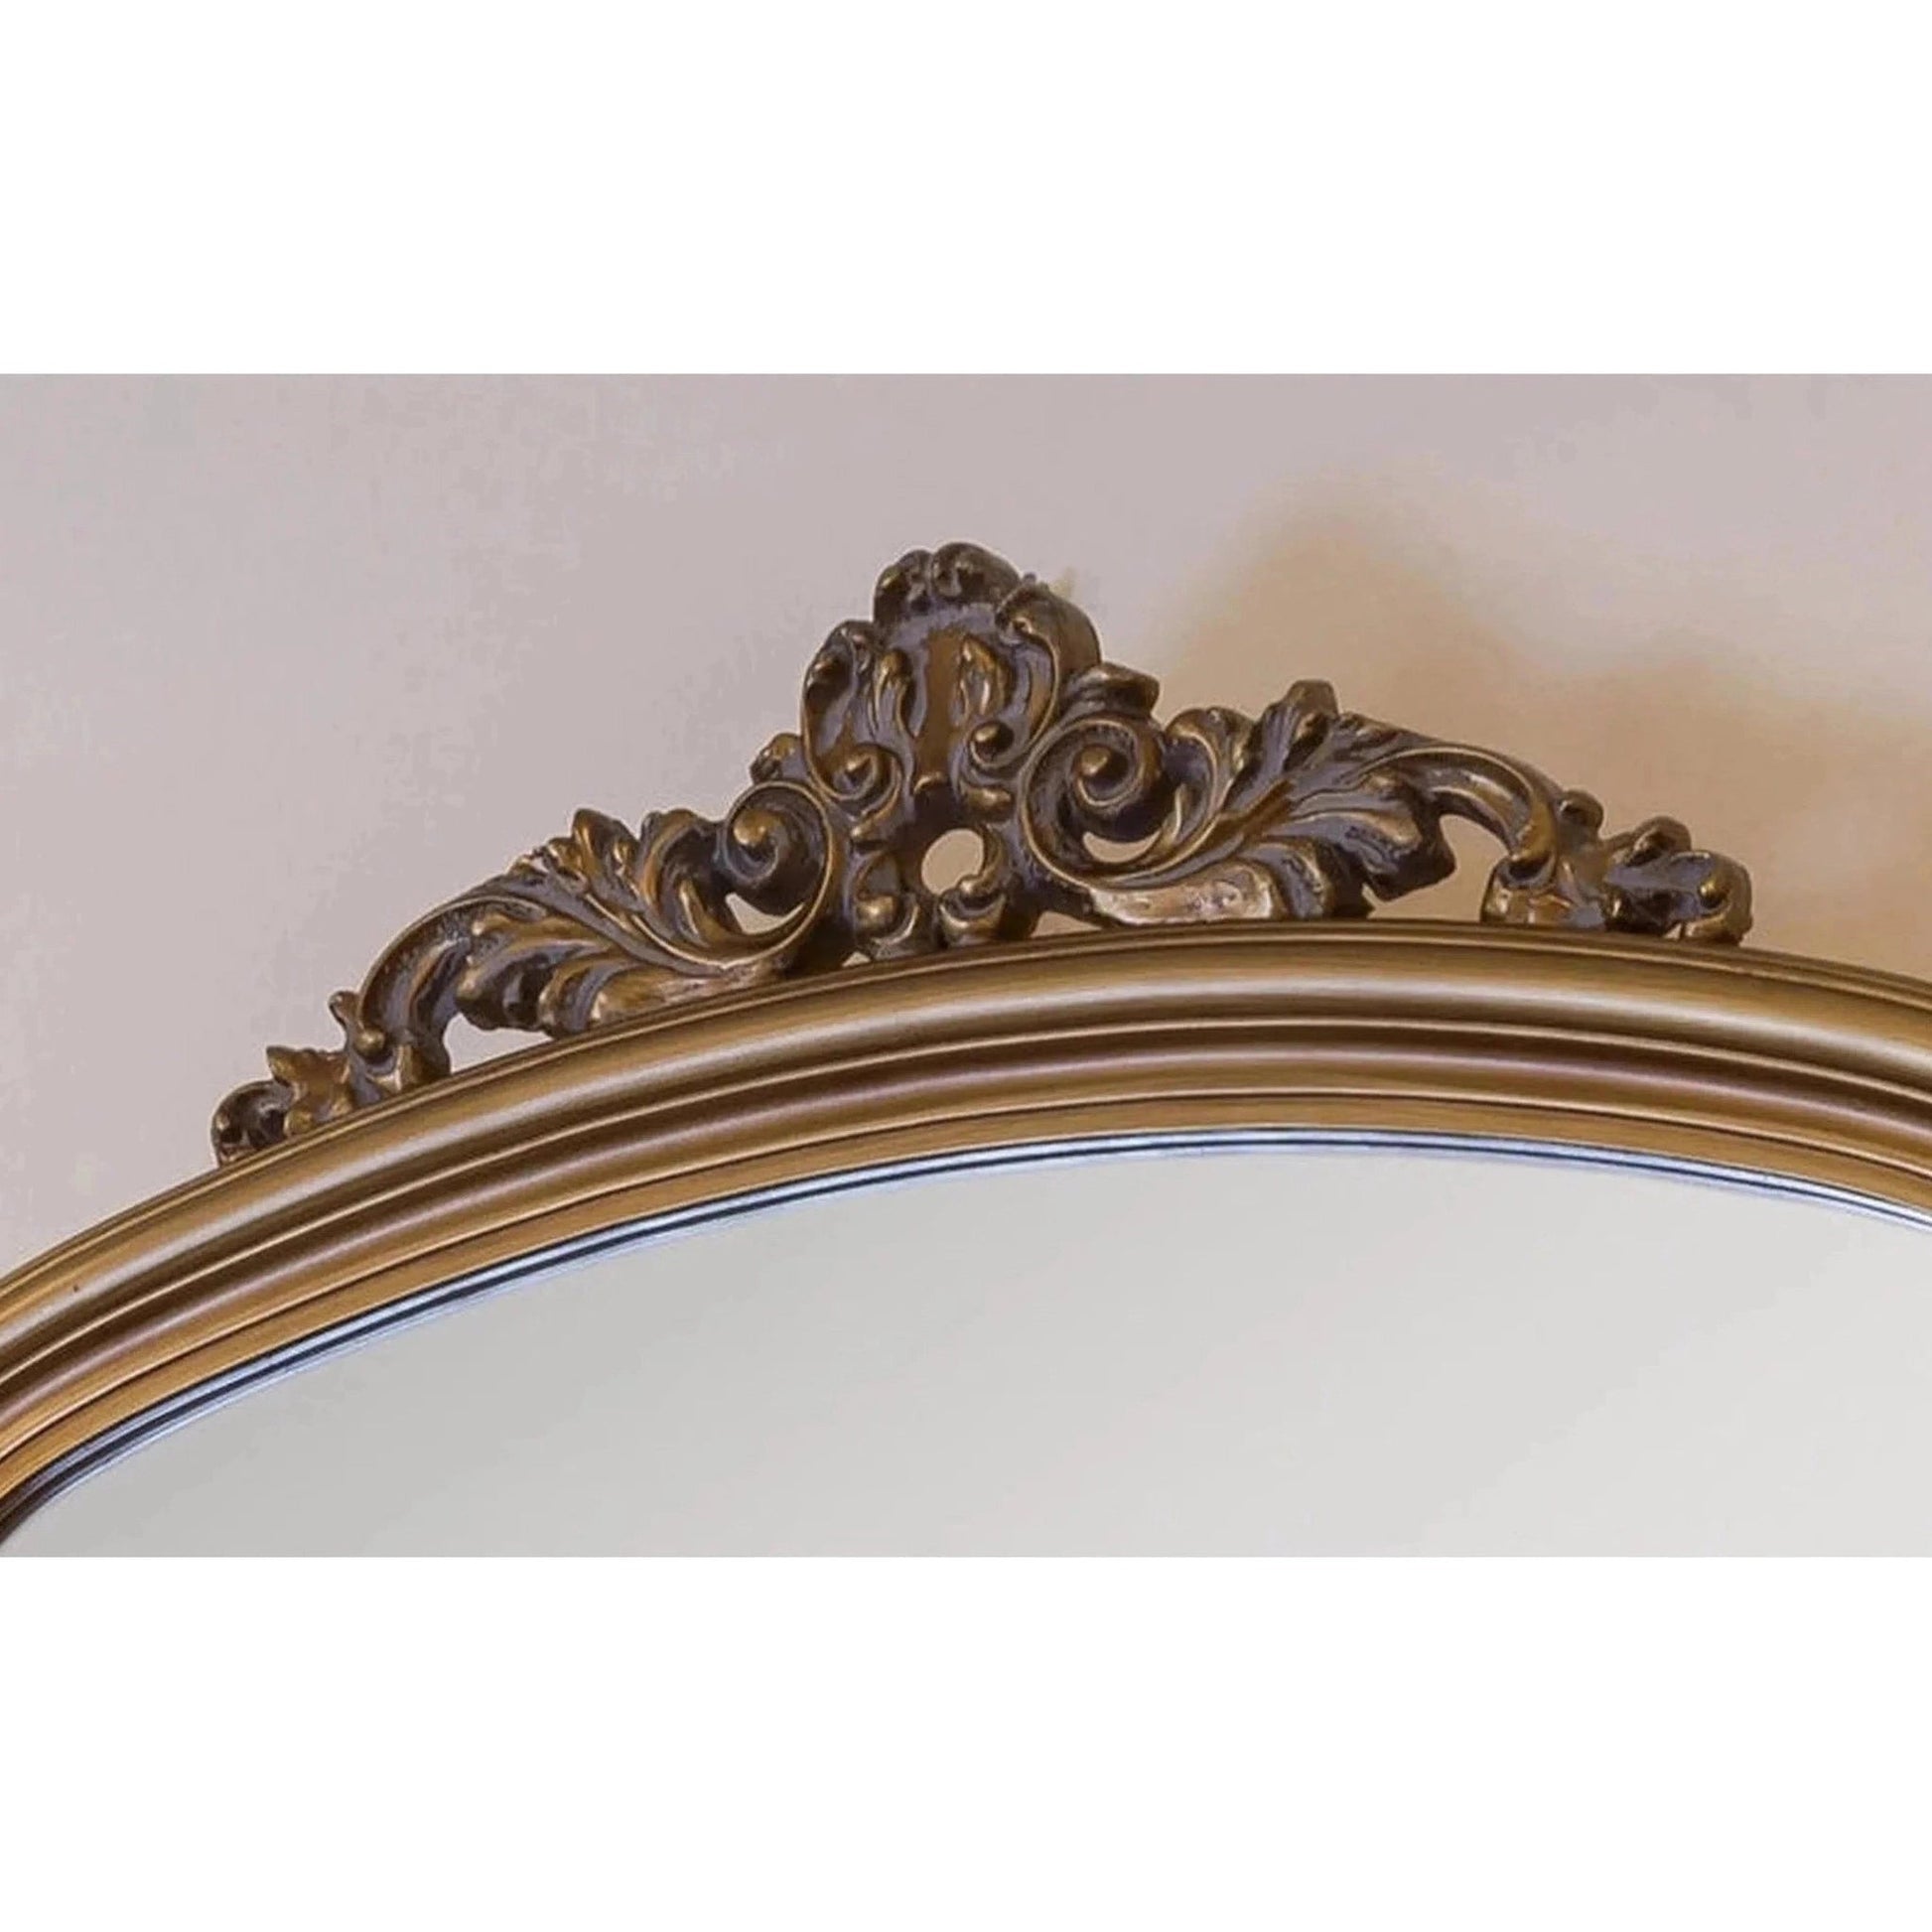 SBC Decor Amarone 39" x 44" Wall-Mounted Wood Frame Dresser Mirror In Antique Gold Finish